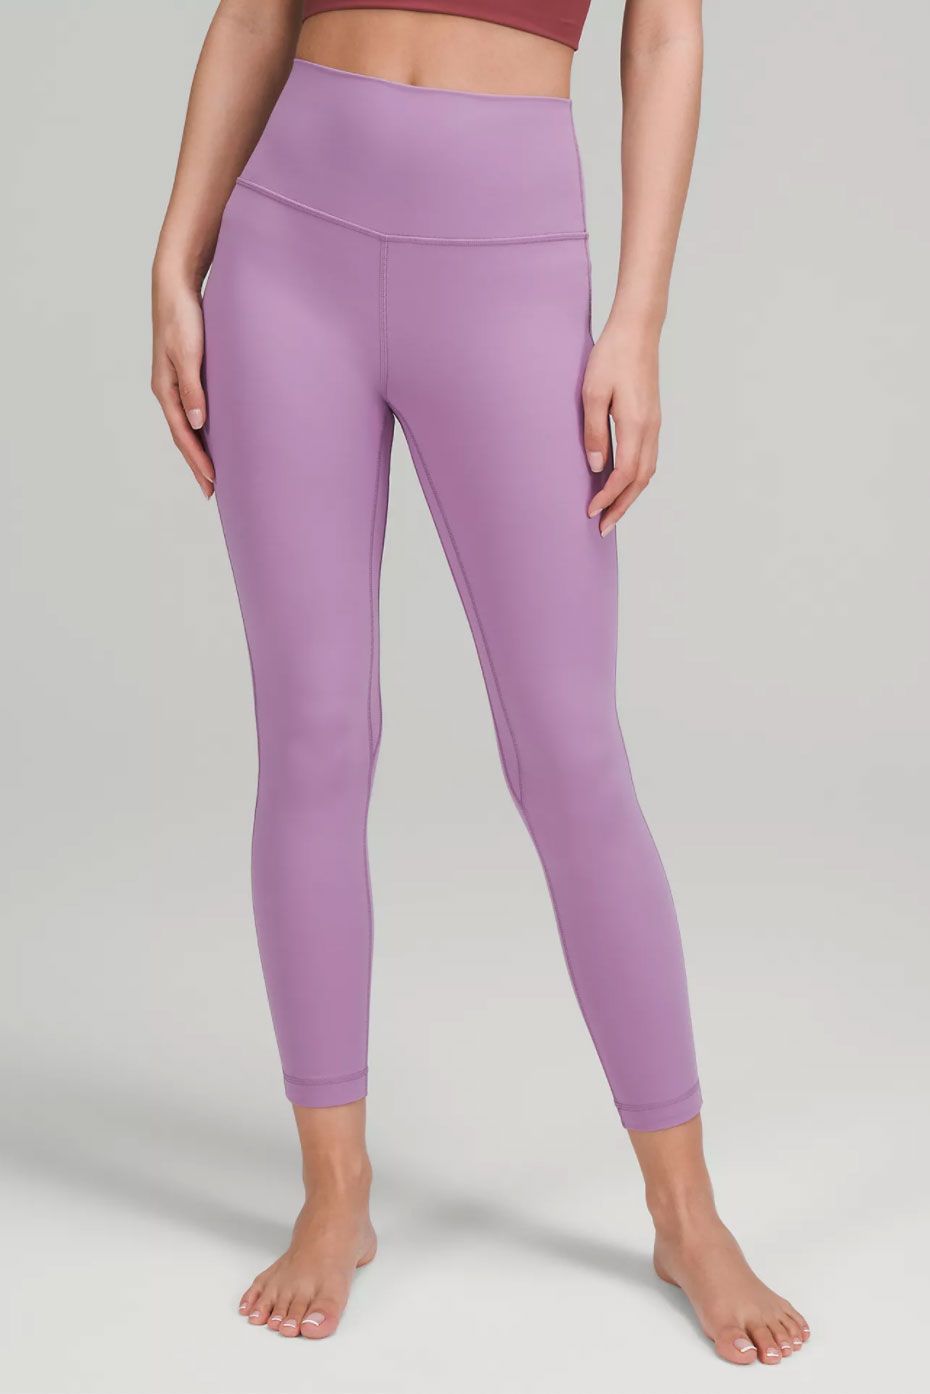 21 Cheap Yoga Pants That Won't Go Sheer During a Workout